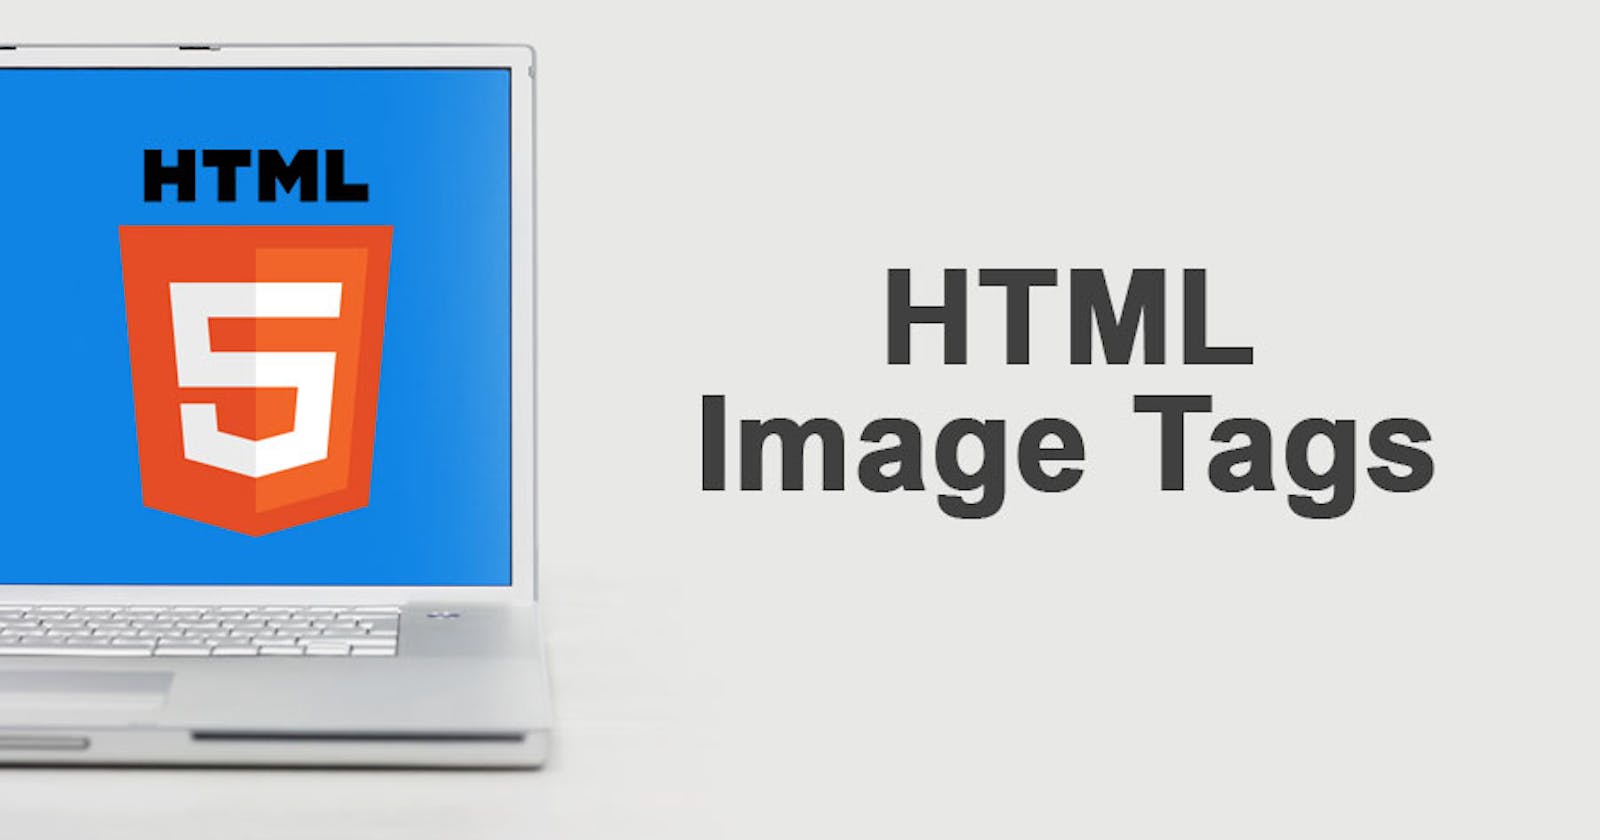 Power  of  Image tag